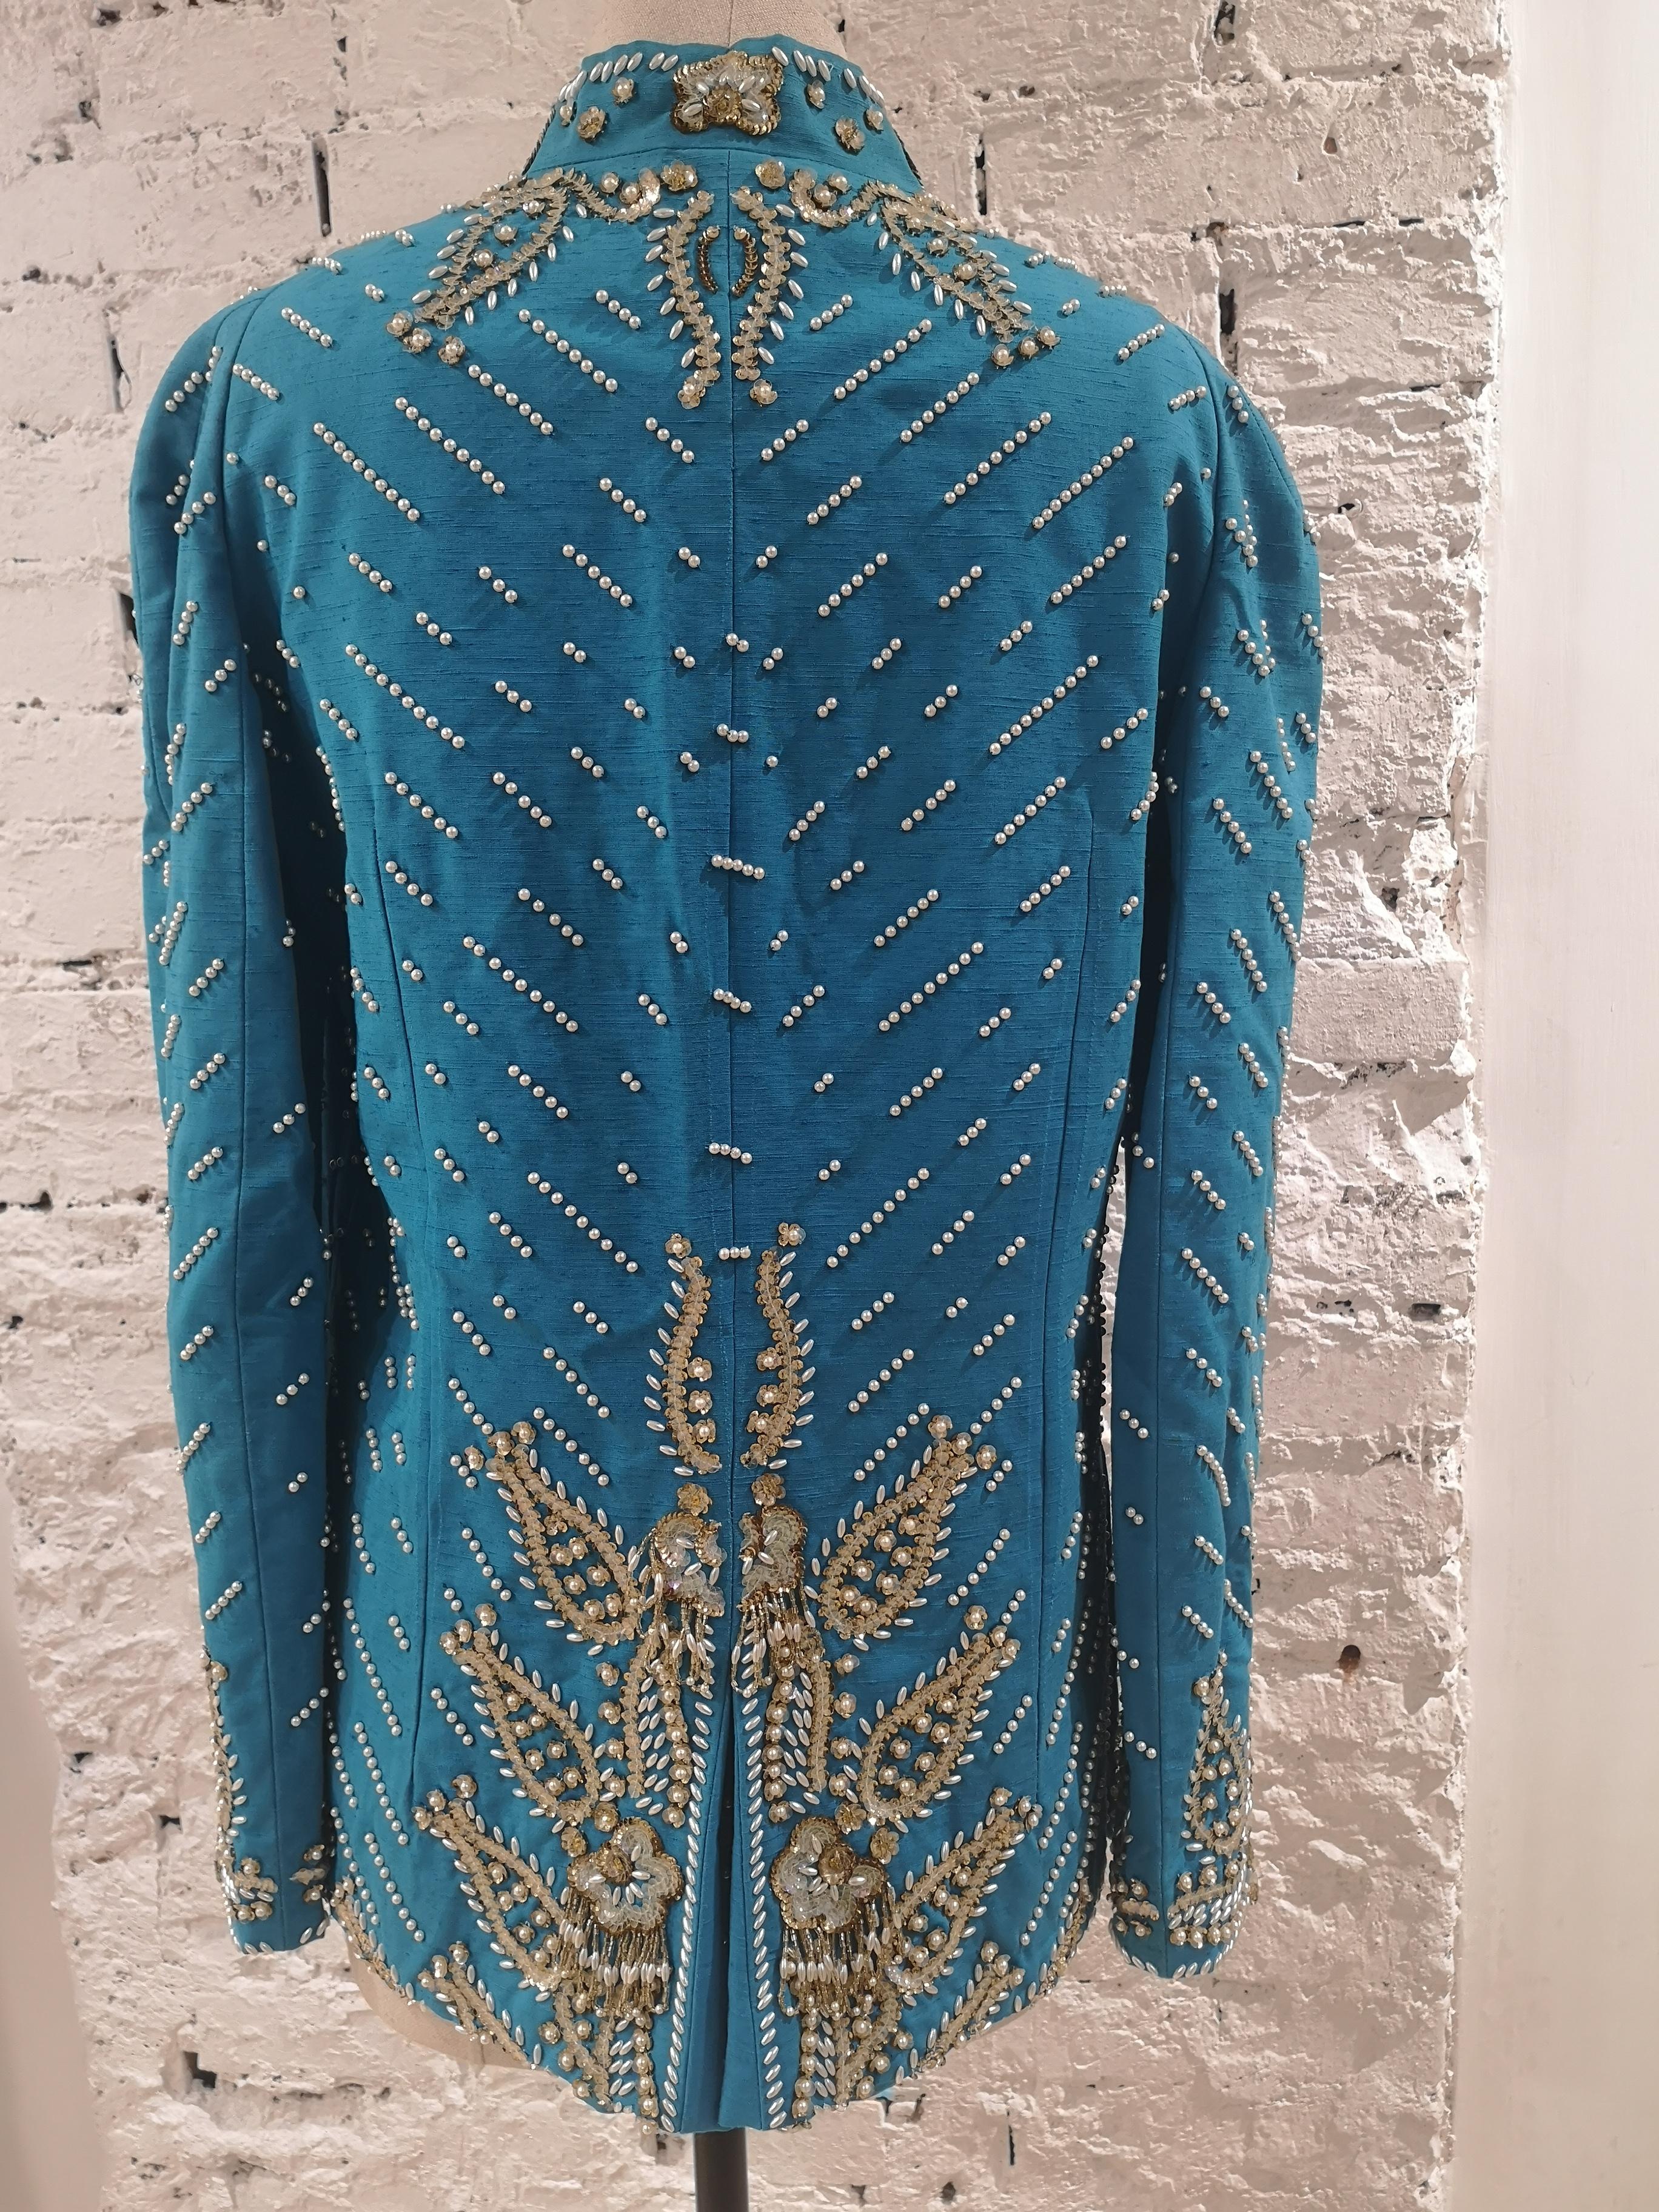 Women's or Men's Christian Dior turquoise pearls beads sequins jacket